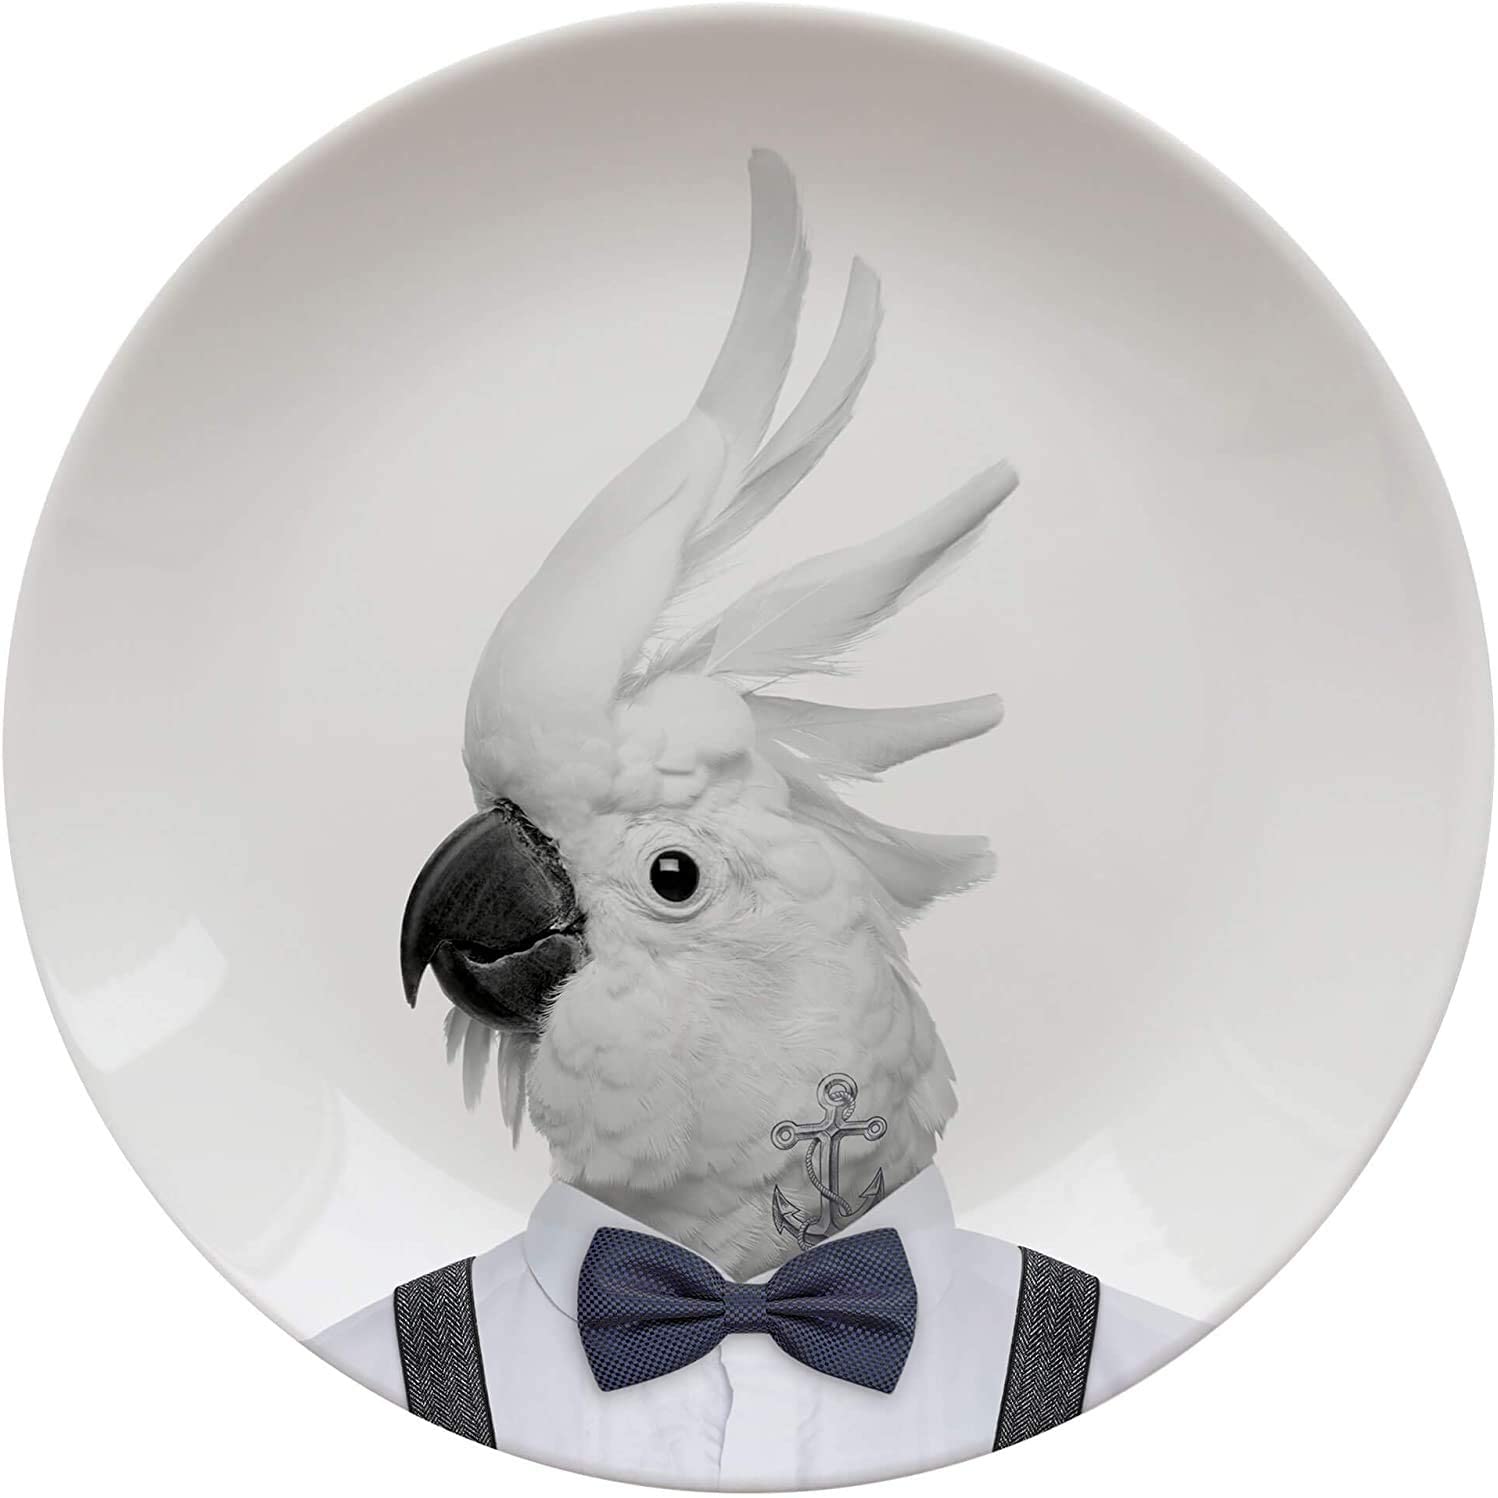 Mustard Novelty Colin The Cockatoo Party Animal Plate